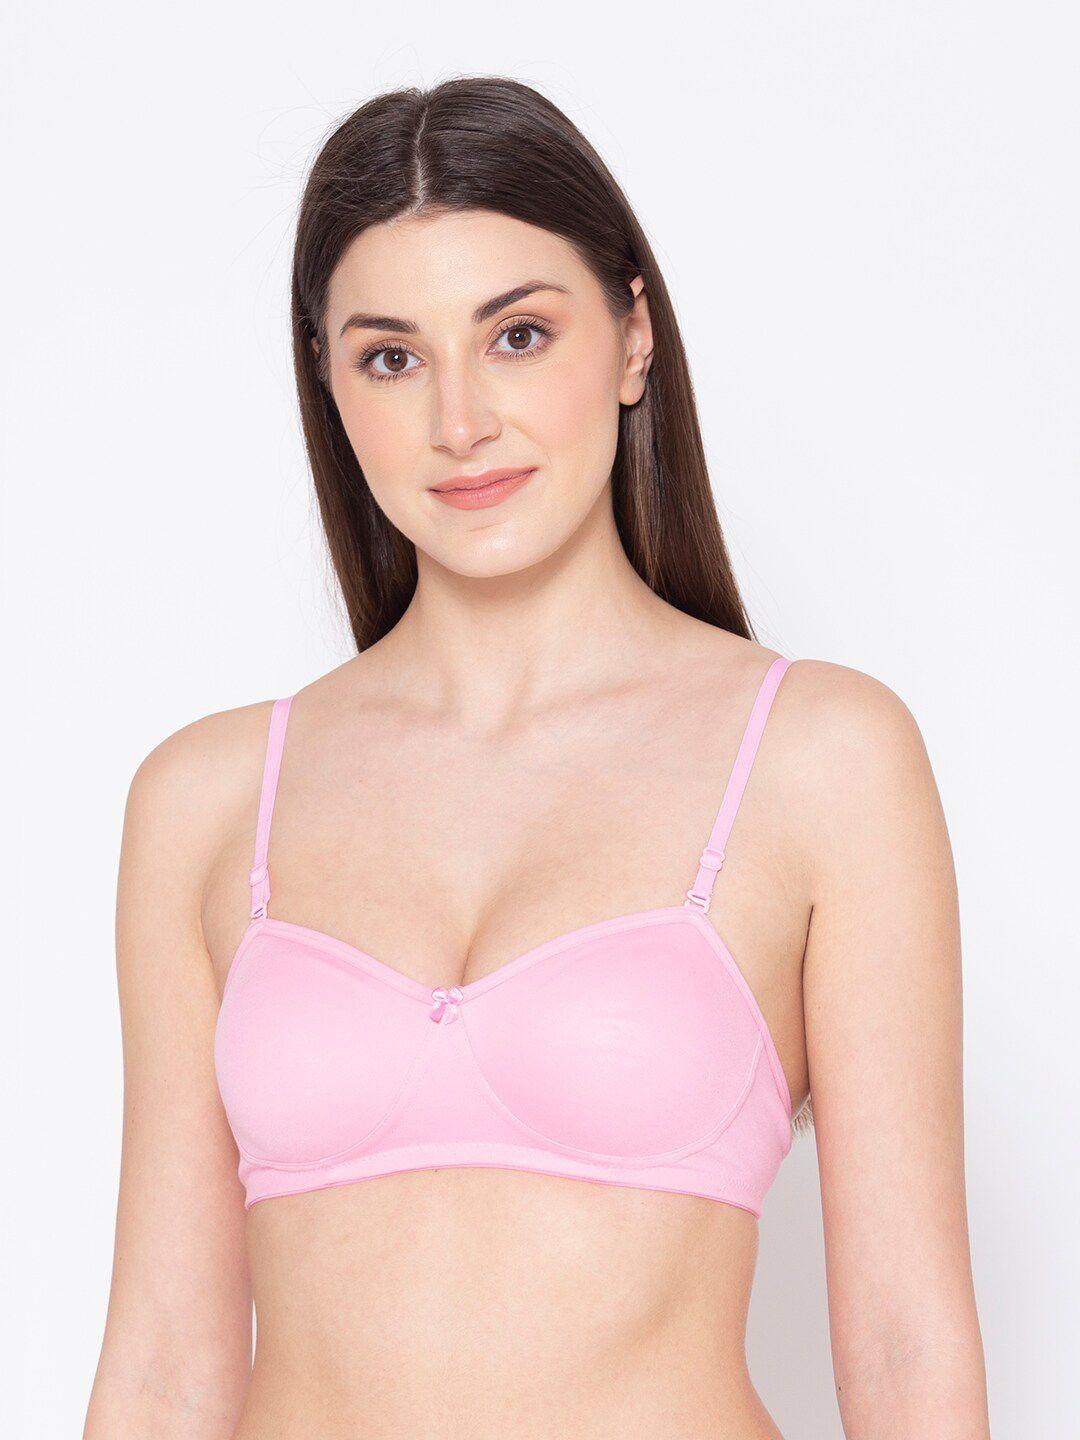 groversons-paris-beauty-women-pink-non-padded-non-wired-t-shirt-bra